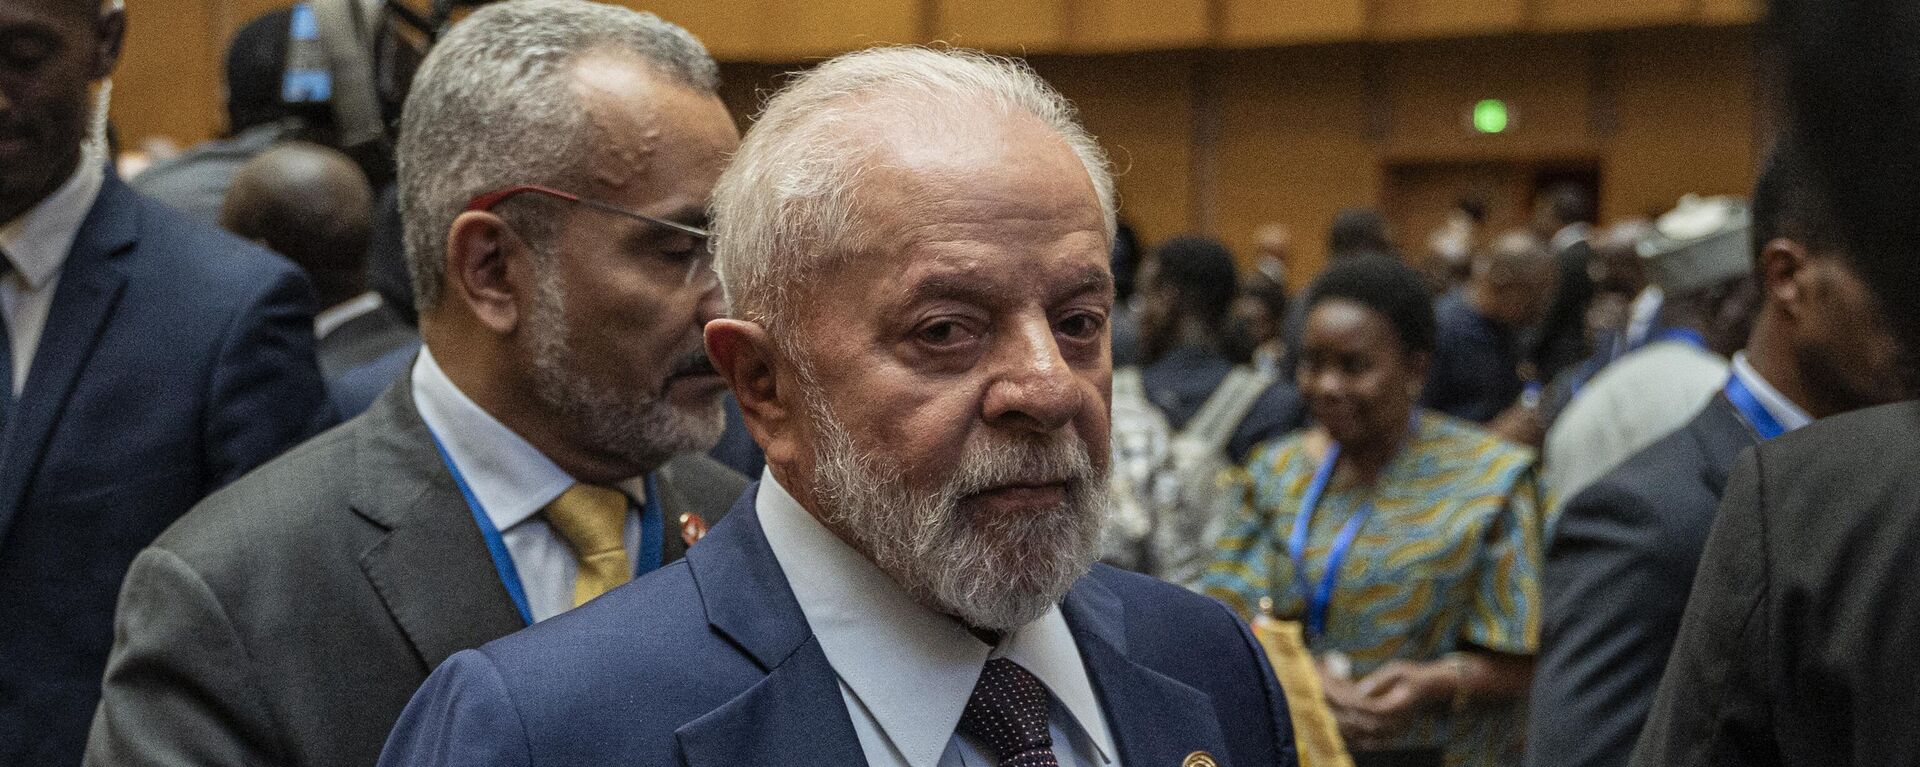 Brazilian President Luiz Inacio Lula da Silva arrives before the opening ceremony of the 37th Ordinary Session of the Assembly of the African Union (AU) at the AU headquarters in Addis Ababa on February 17, 2024. - Sputnik Africa, 1920, 19.02.2024